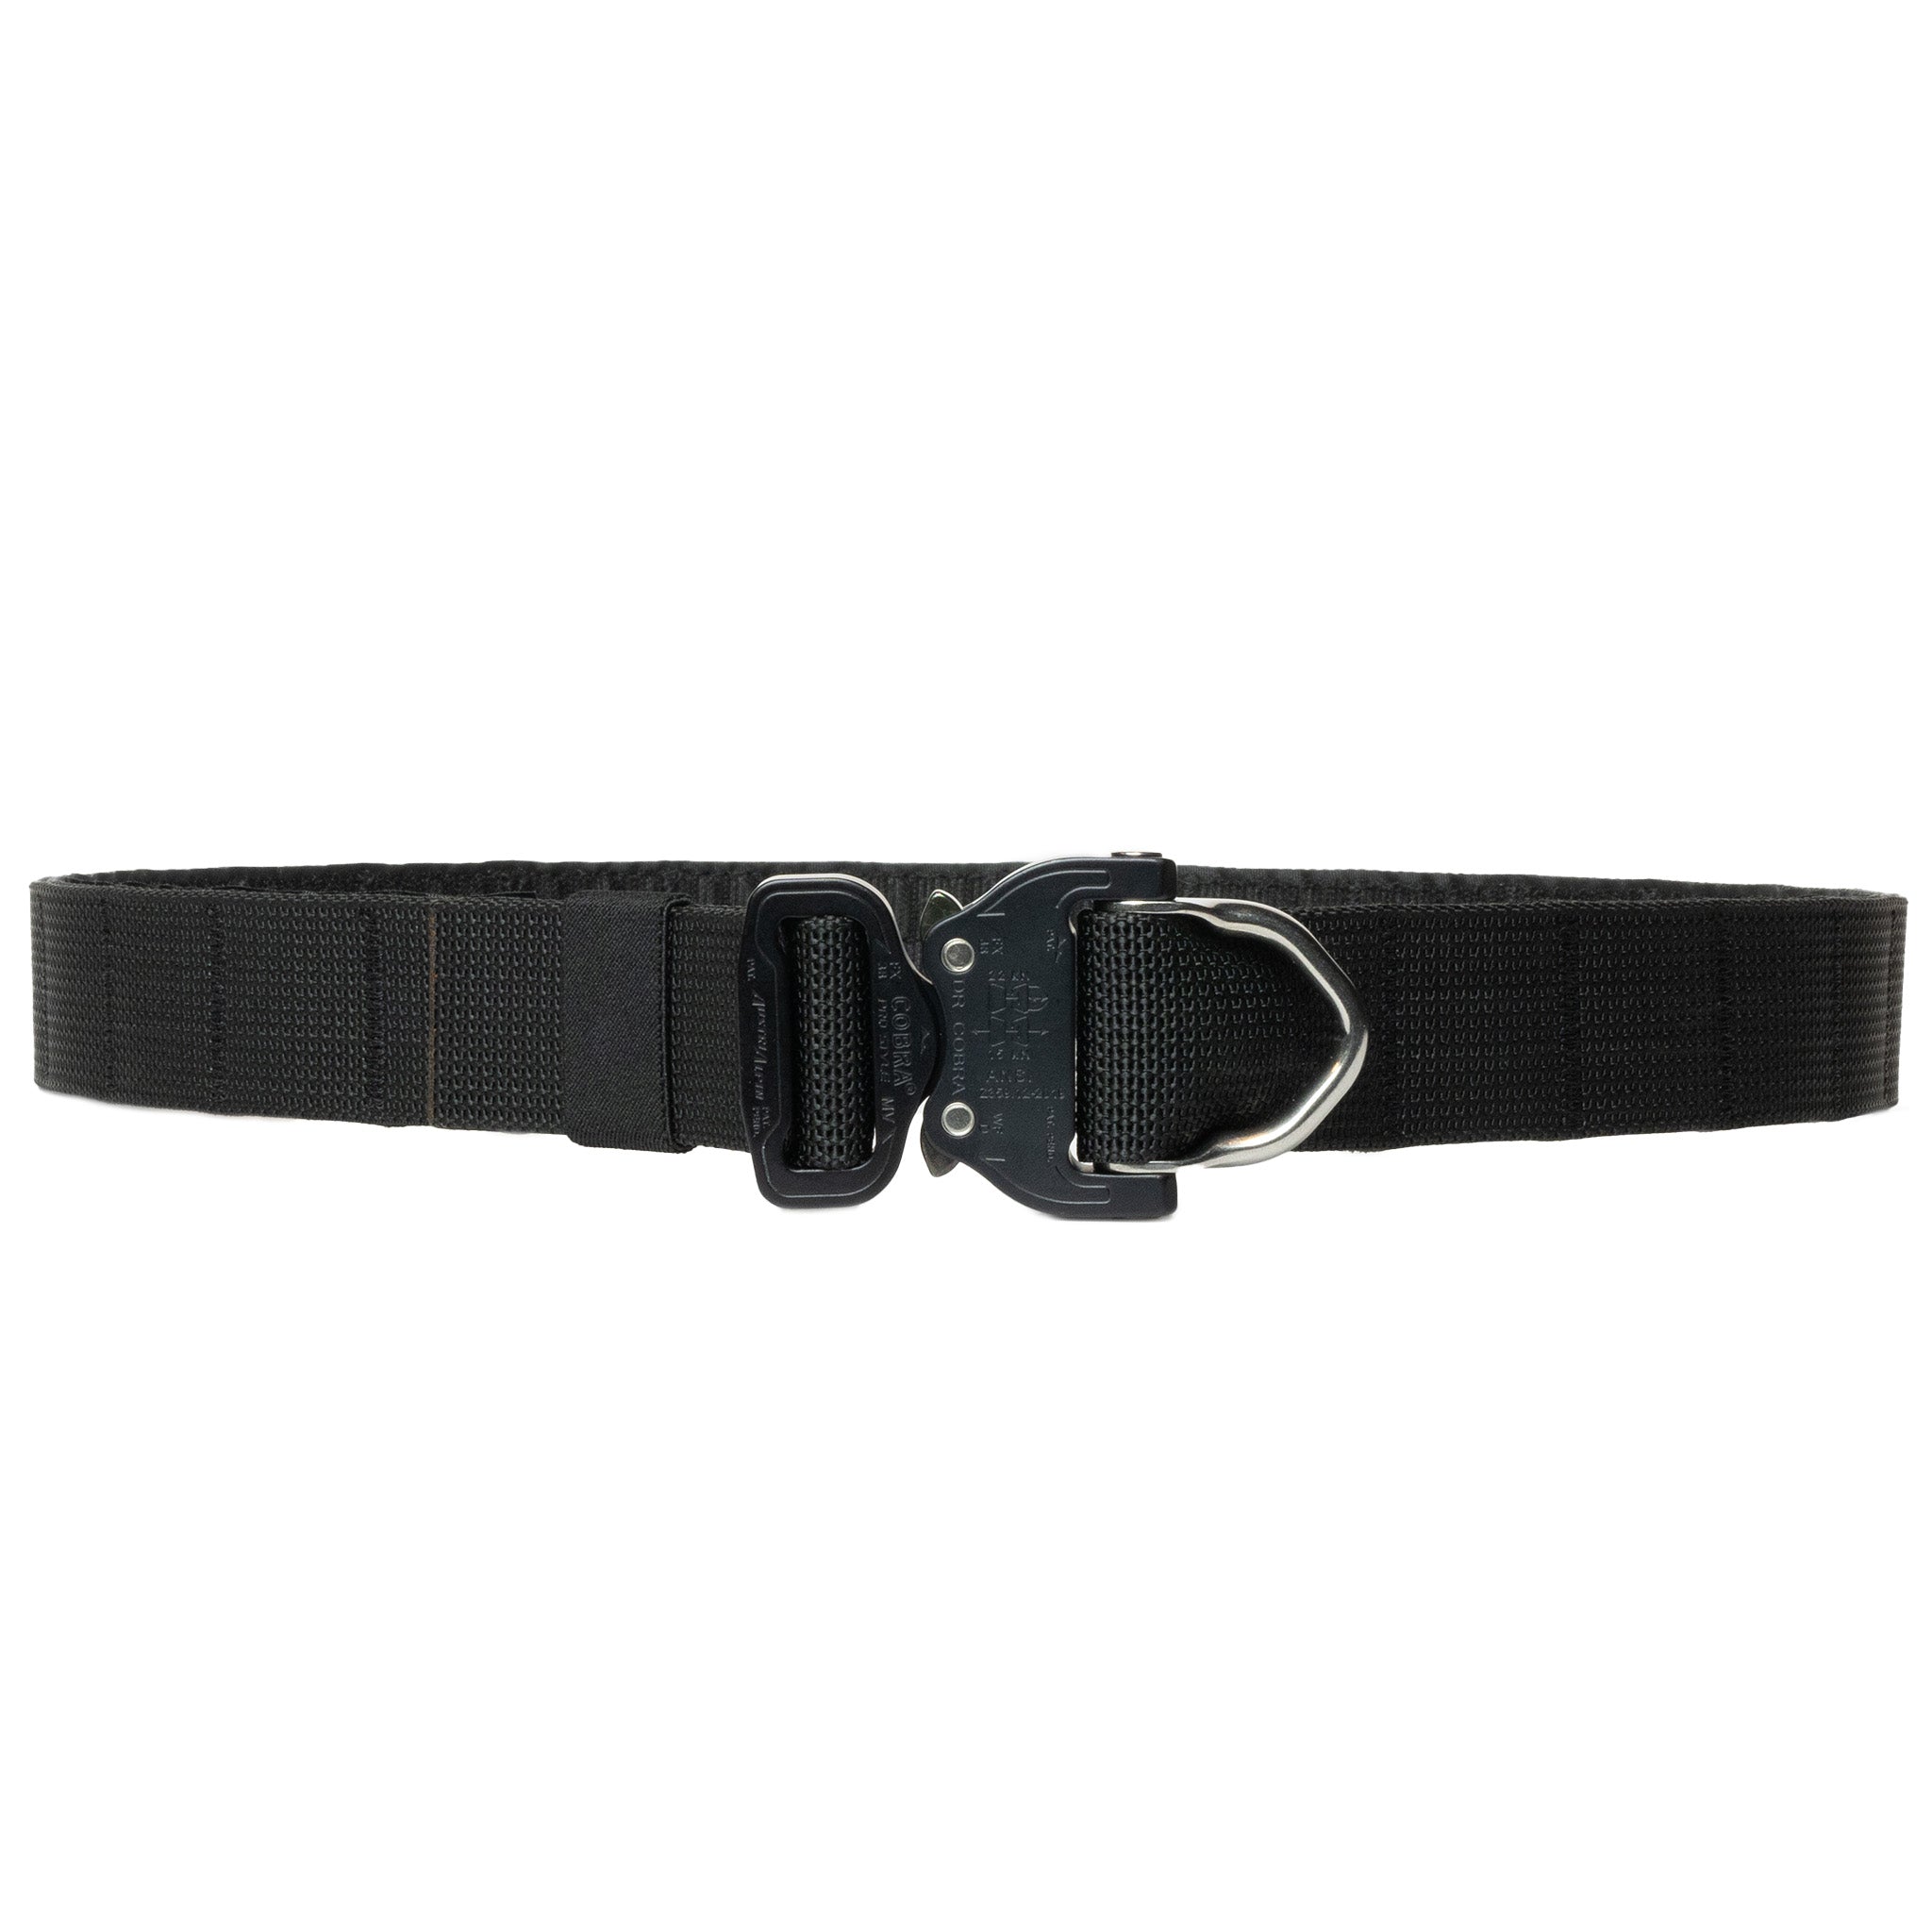 Ciguera Gear Company Battlewagon War Belt in Black that is the ideal choice as a duty belt. It's made in the USA and the buckle is a Austri Alpin Cobra buckle.